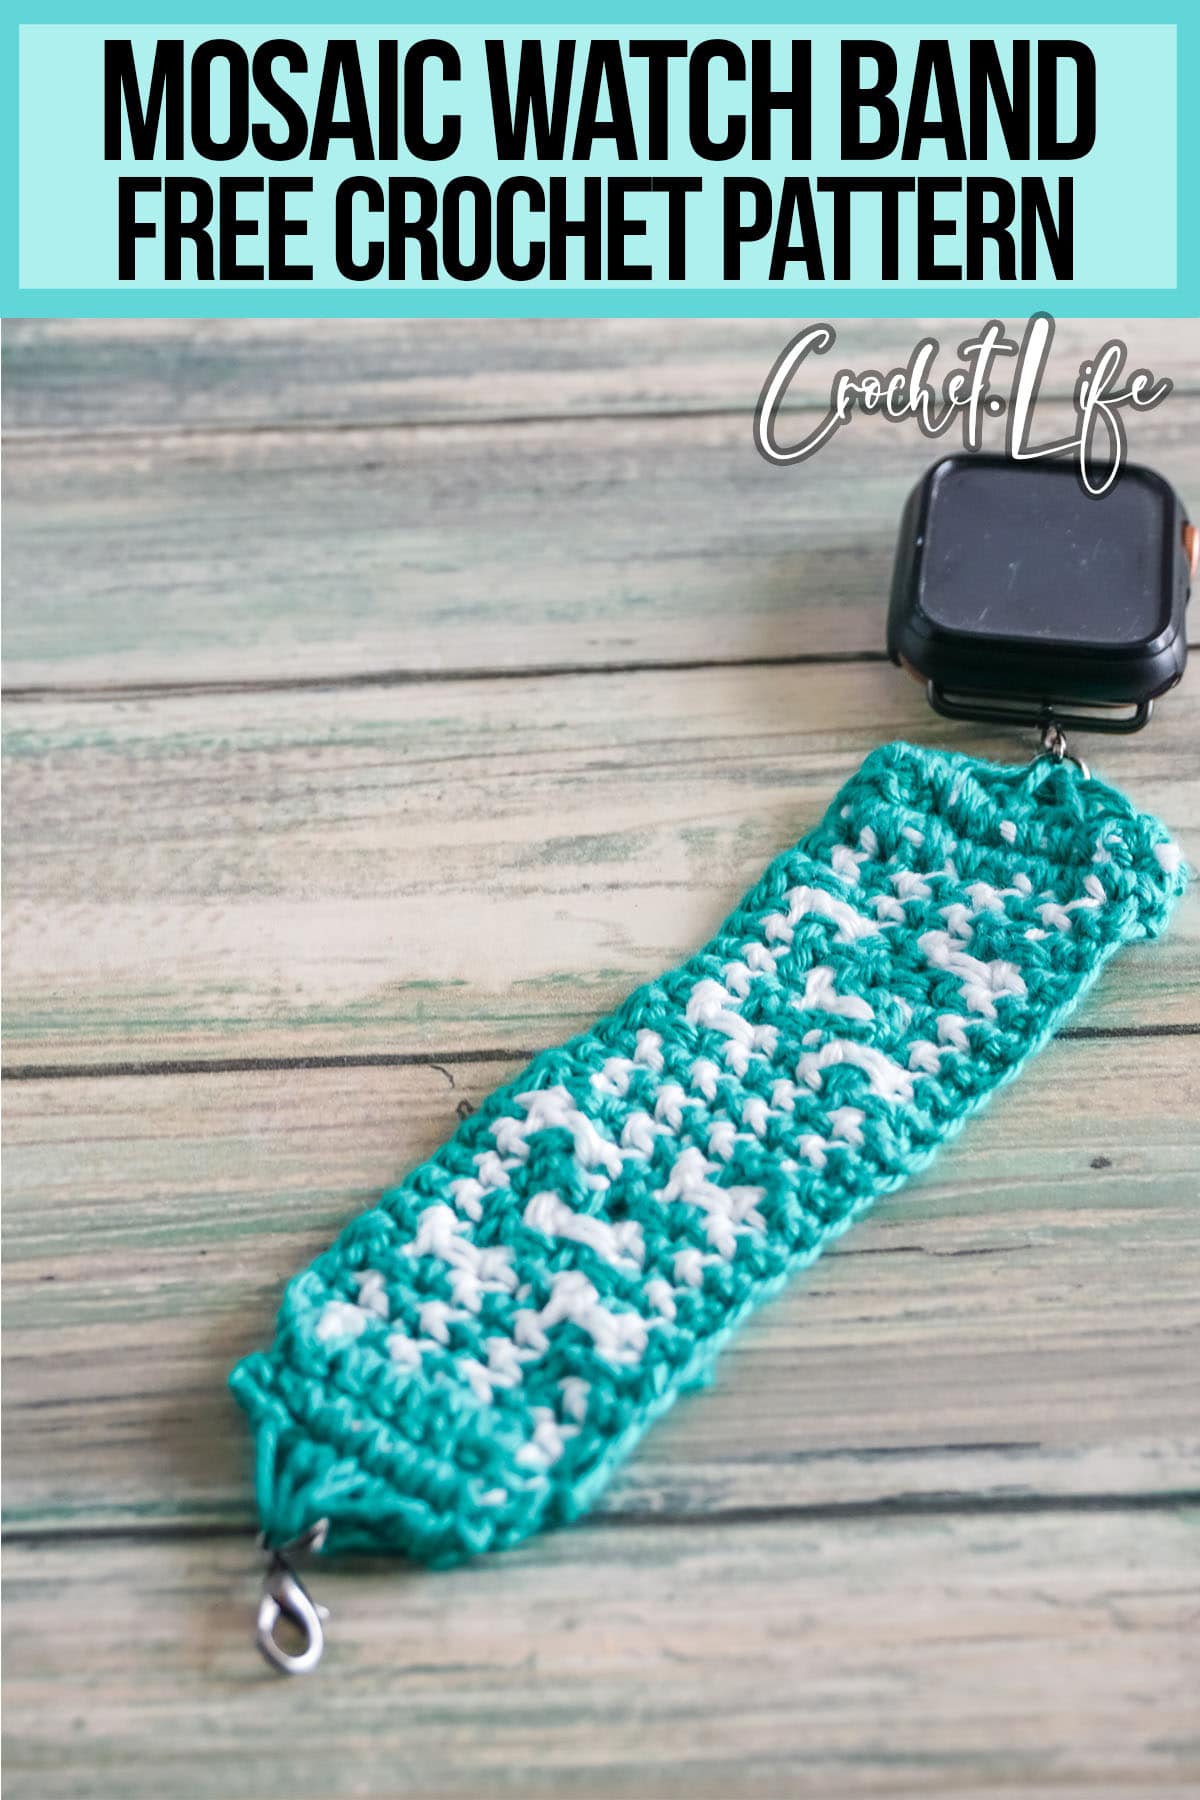 beginner crochet pattern mosaic watch strap with text which reads mosaic watch band free crochet pattern